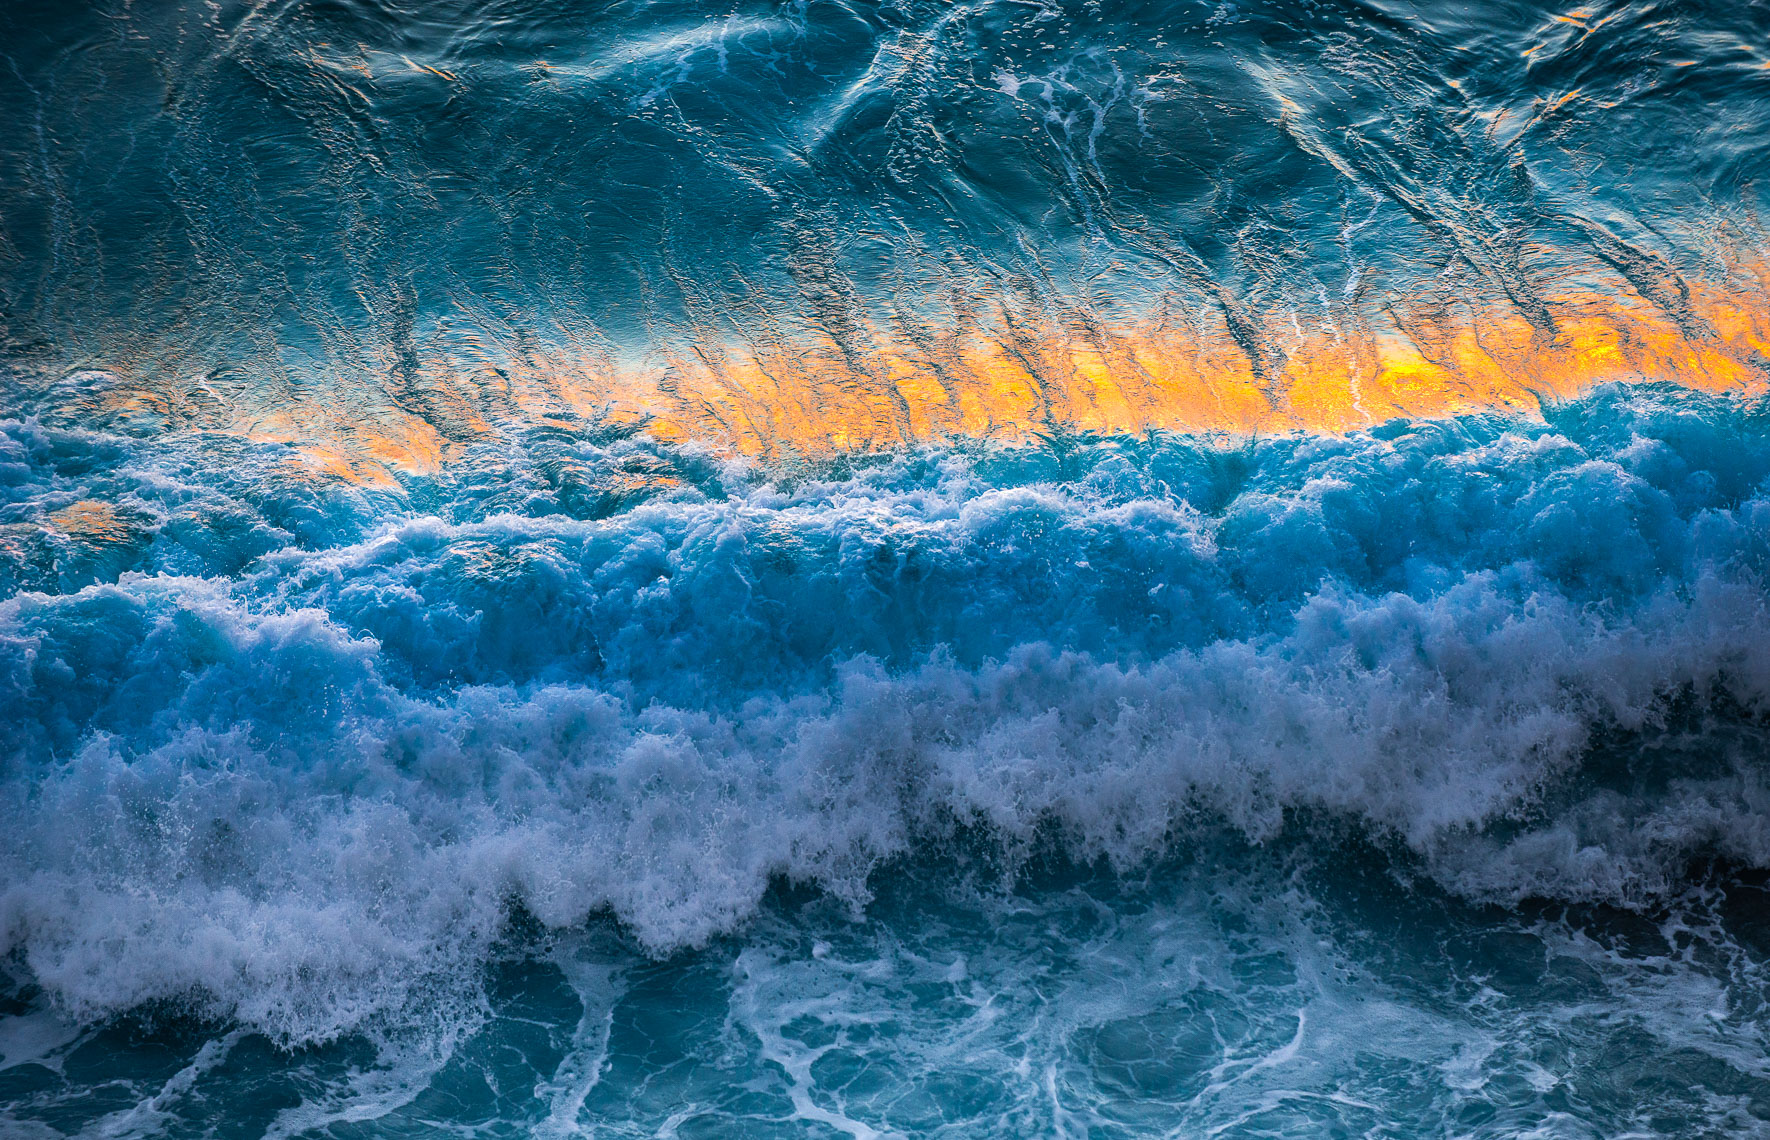 TP_1-84.   The most amazing waves I have photographed. The setting sun reflecting off the crest of the breaking wave creates this breathtaking image.